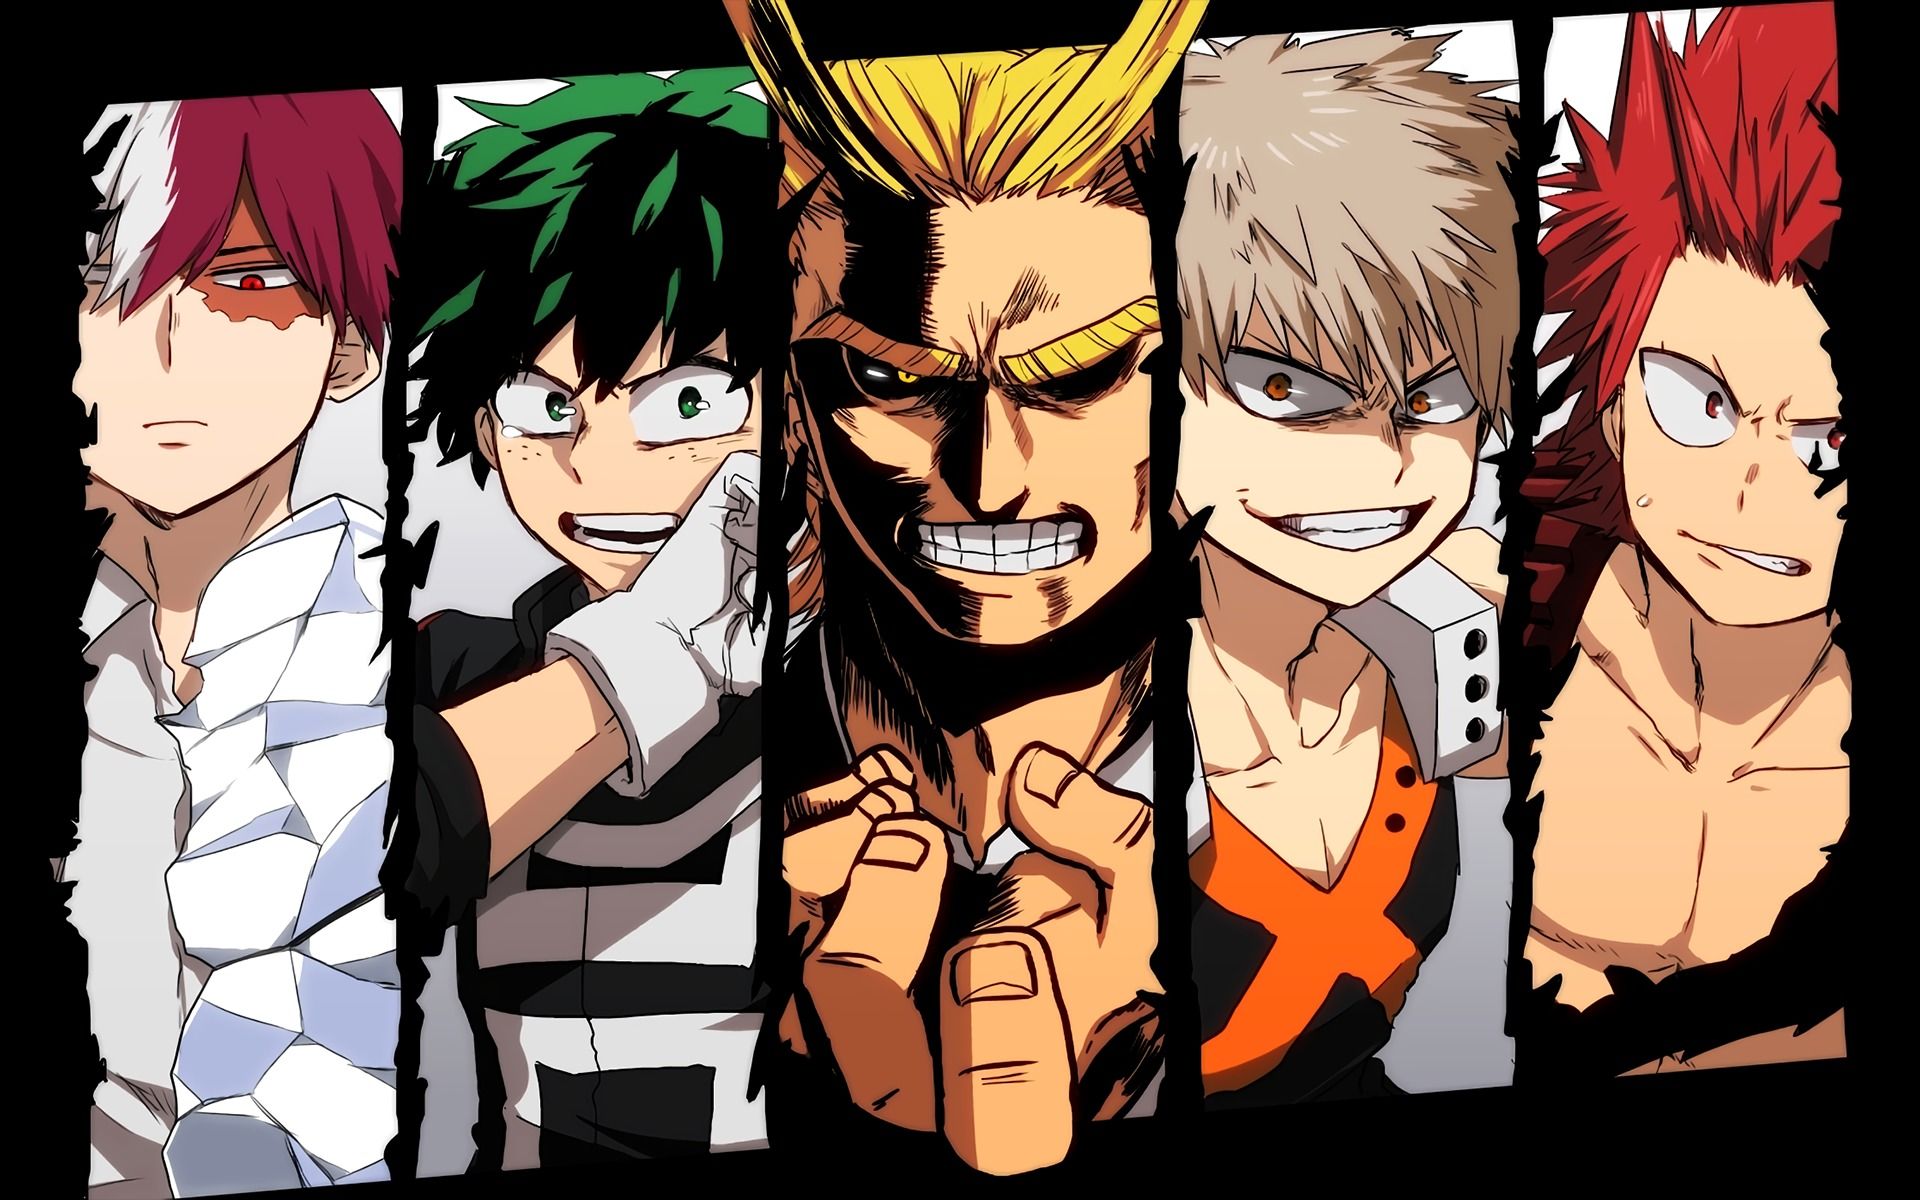 Download wallpaper from anime My Hero Academia with tags: Computer